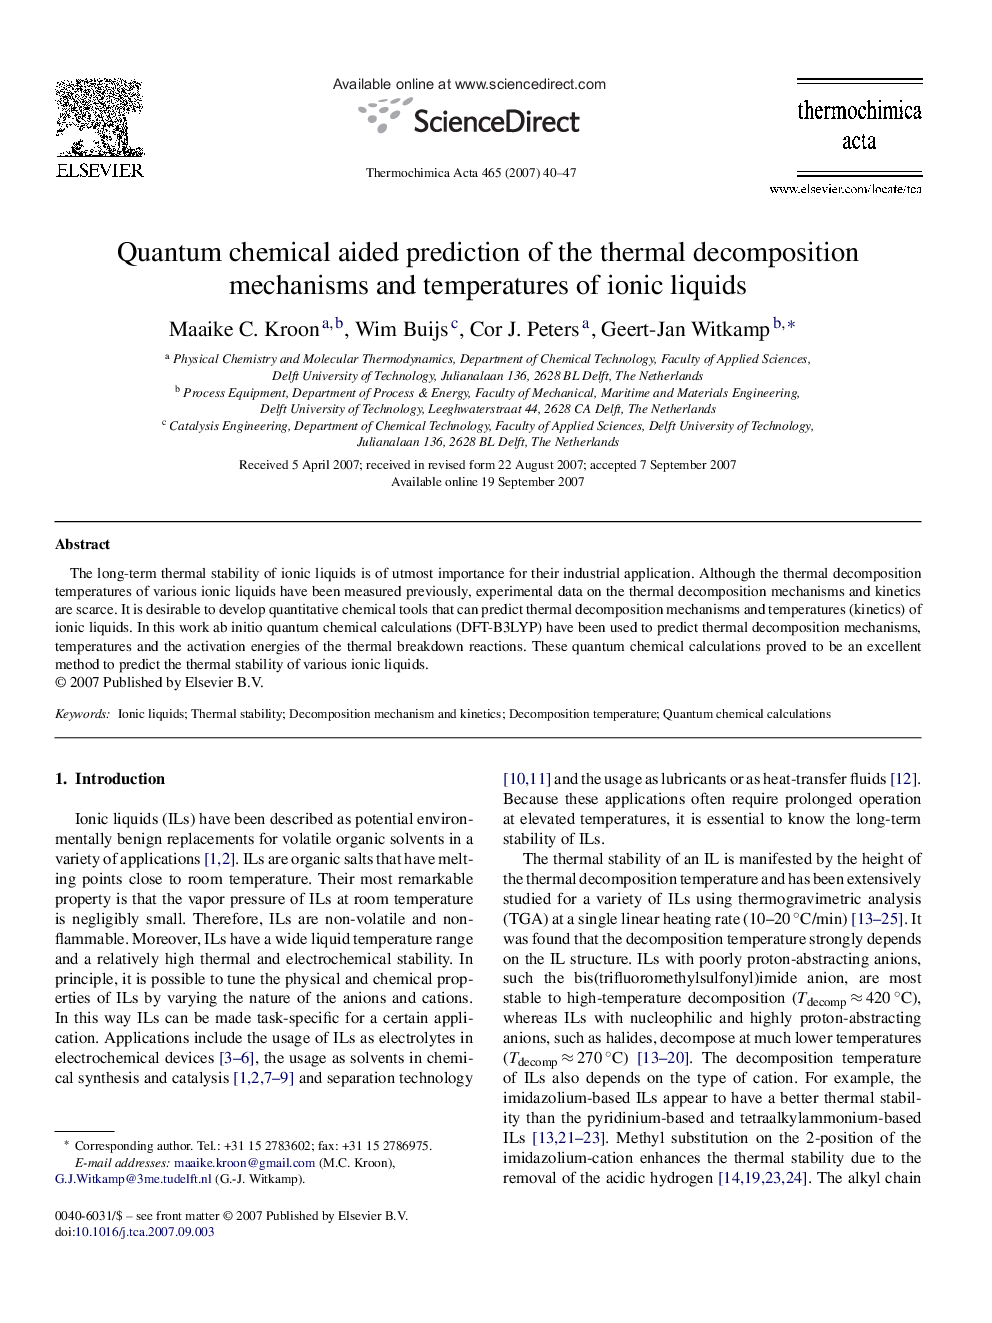 Quantum chemical aided prediction of the thermal decomposition mechanisms and temperatures of ionic liquids